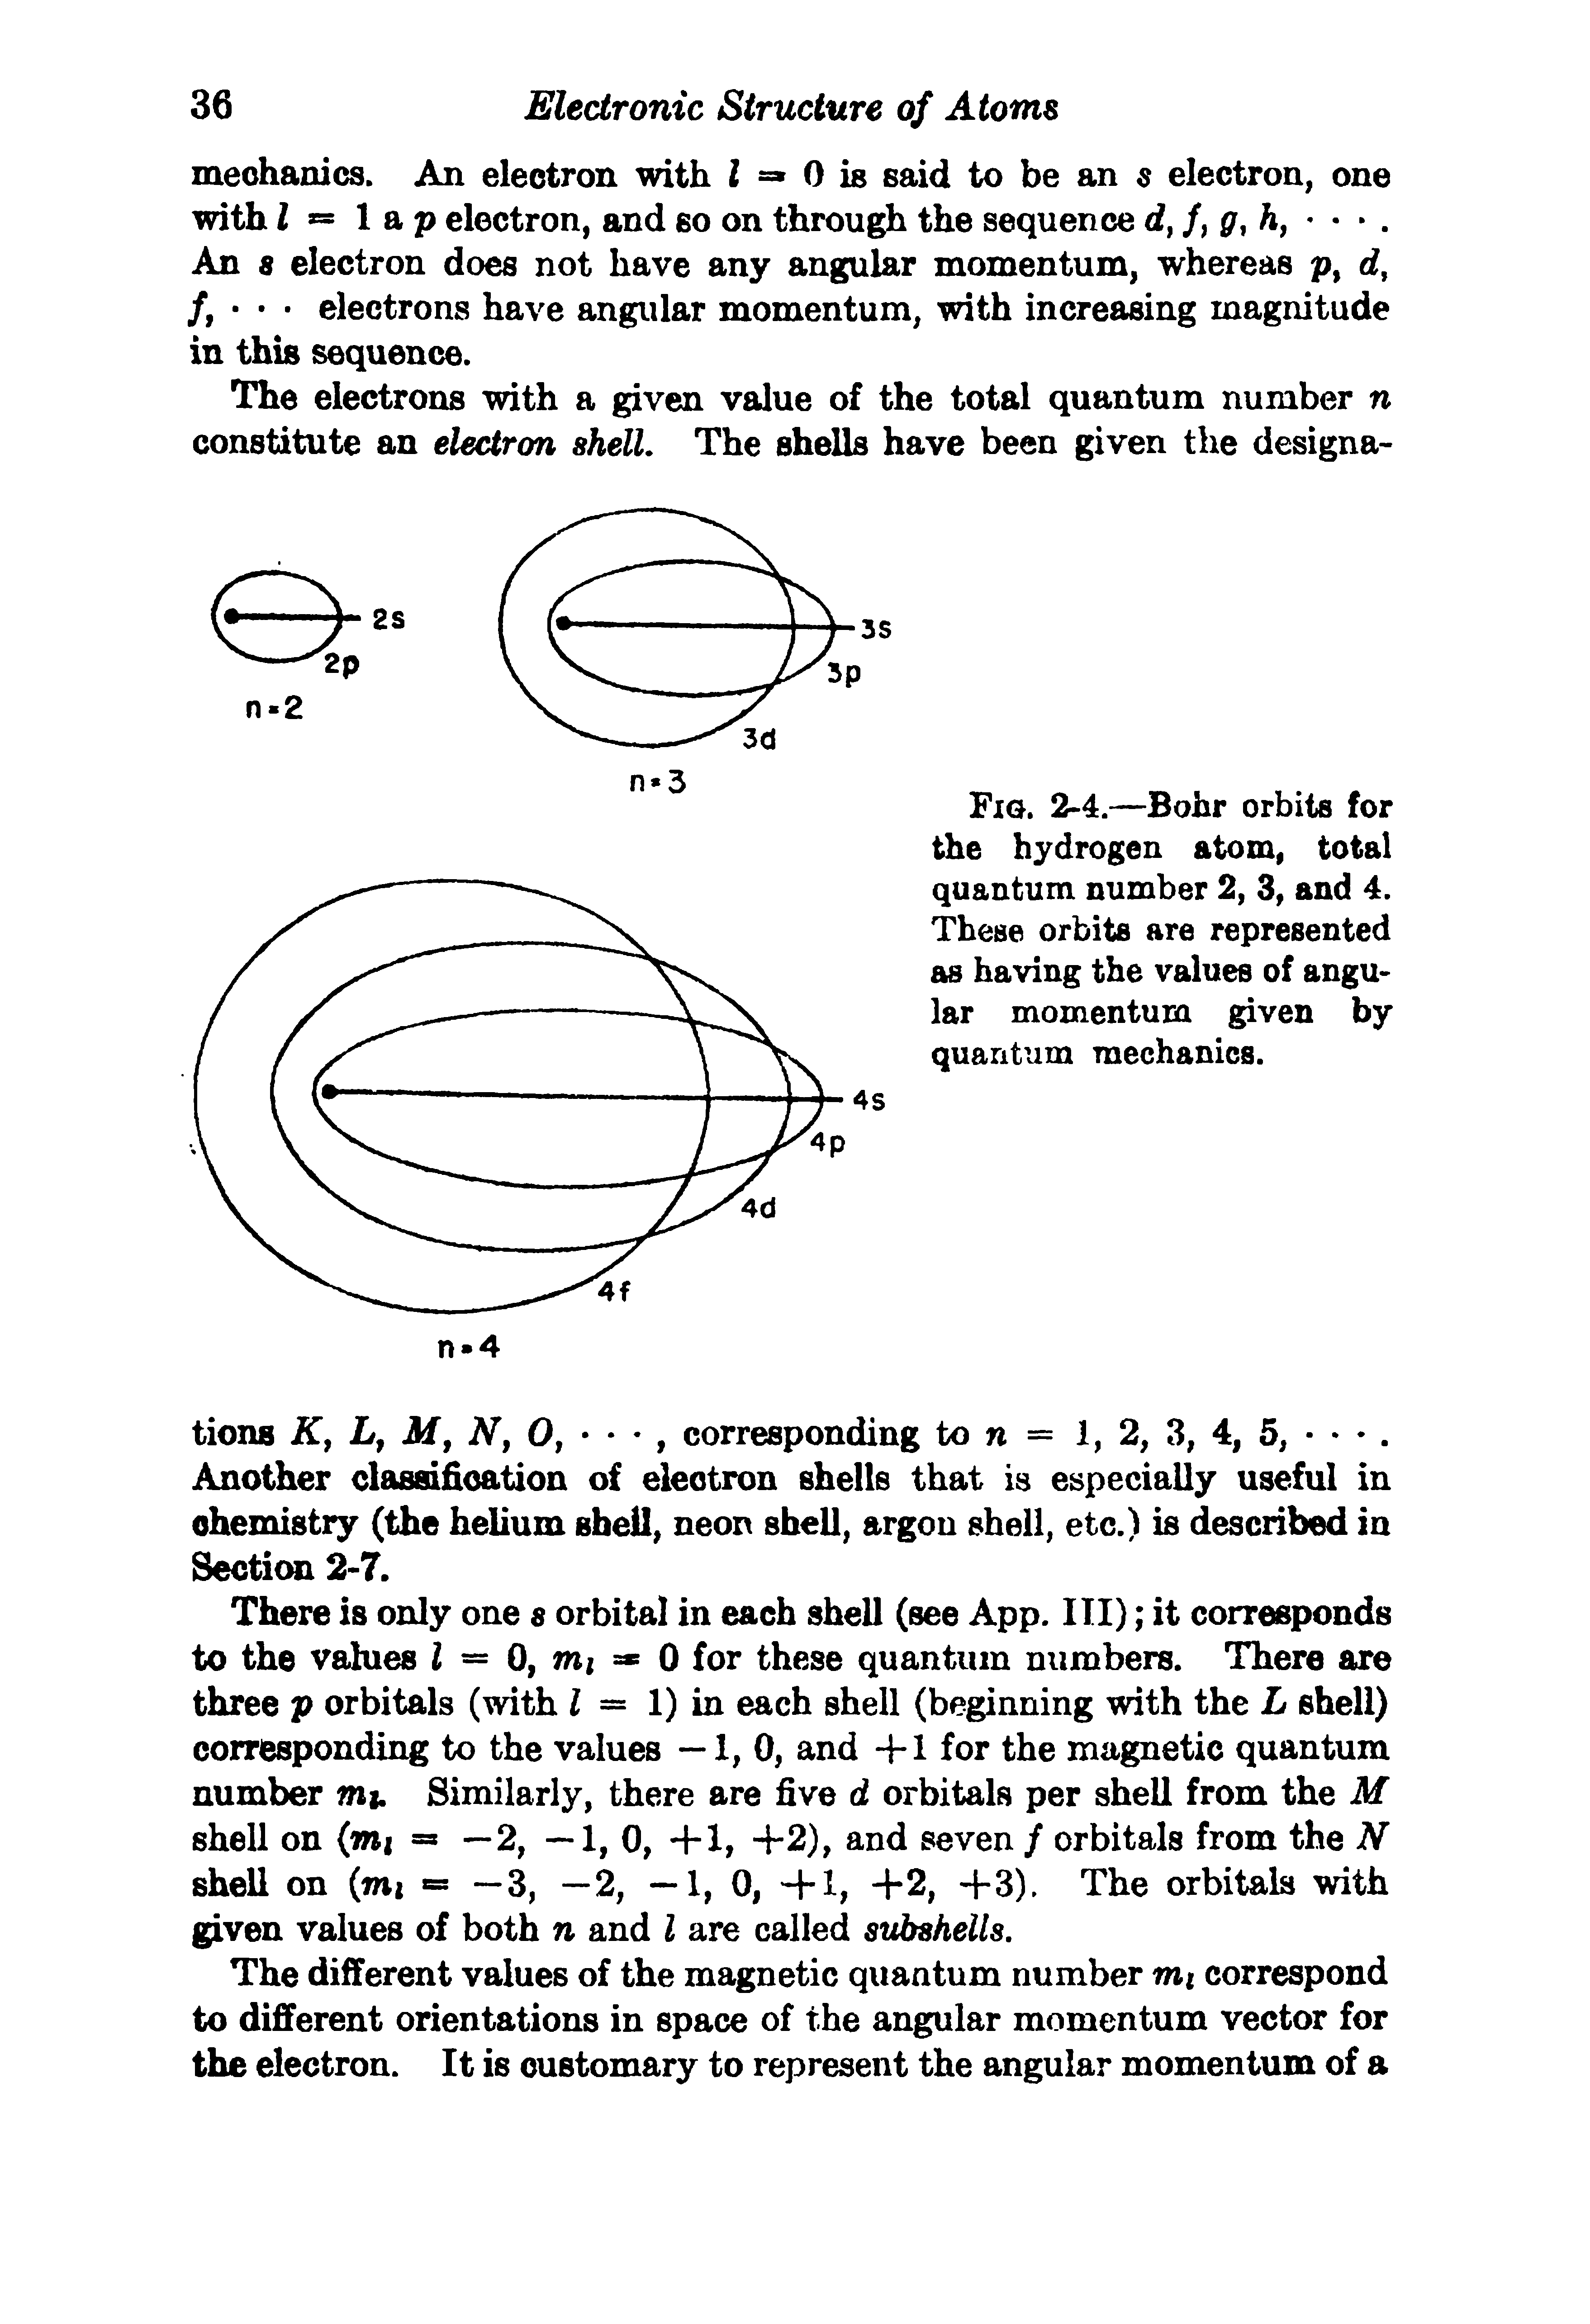 Fig. 2-4.—Bohr orbits for the hydrogen atom, total quantum number 2, 3, and 4. These orbits are represented as having the values of angular momentum given by quantum mechanics.